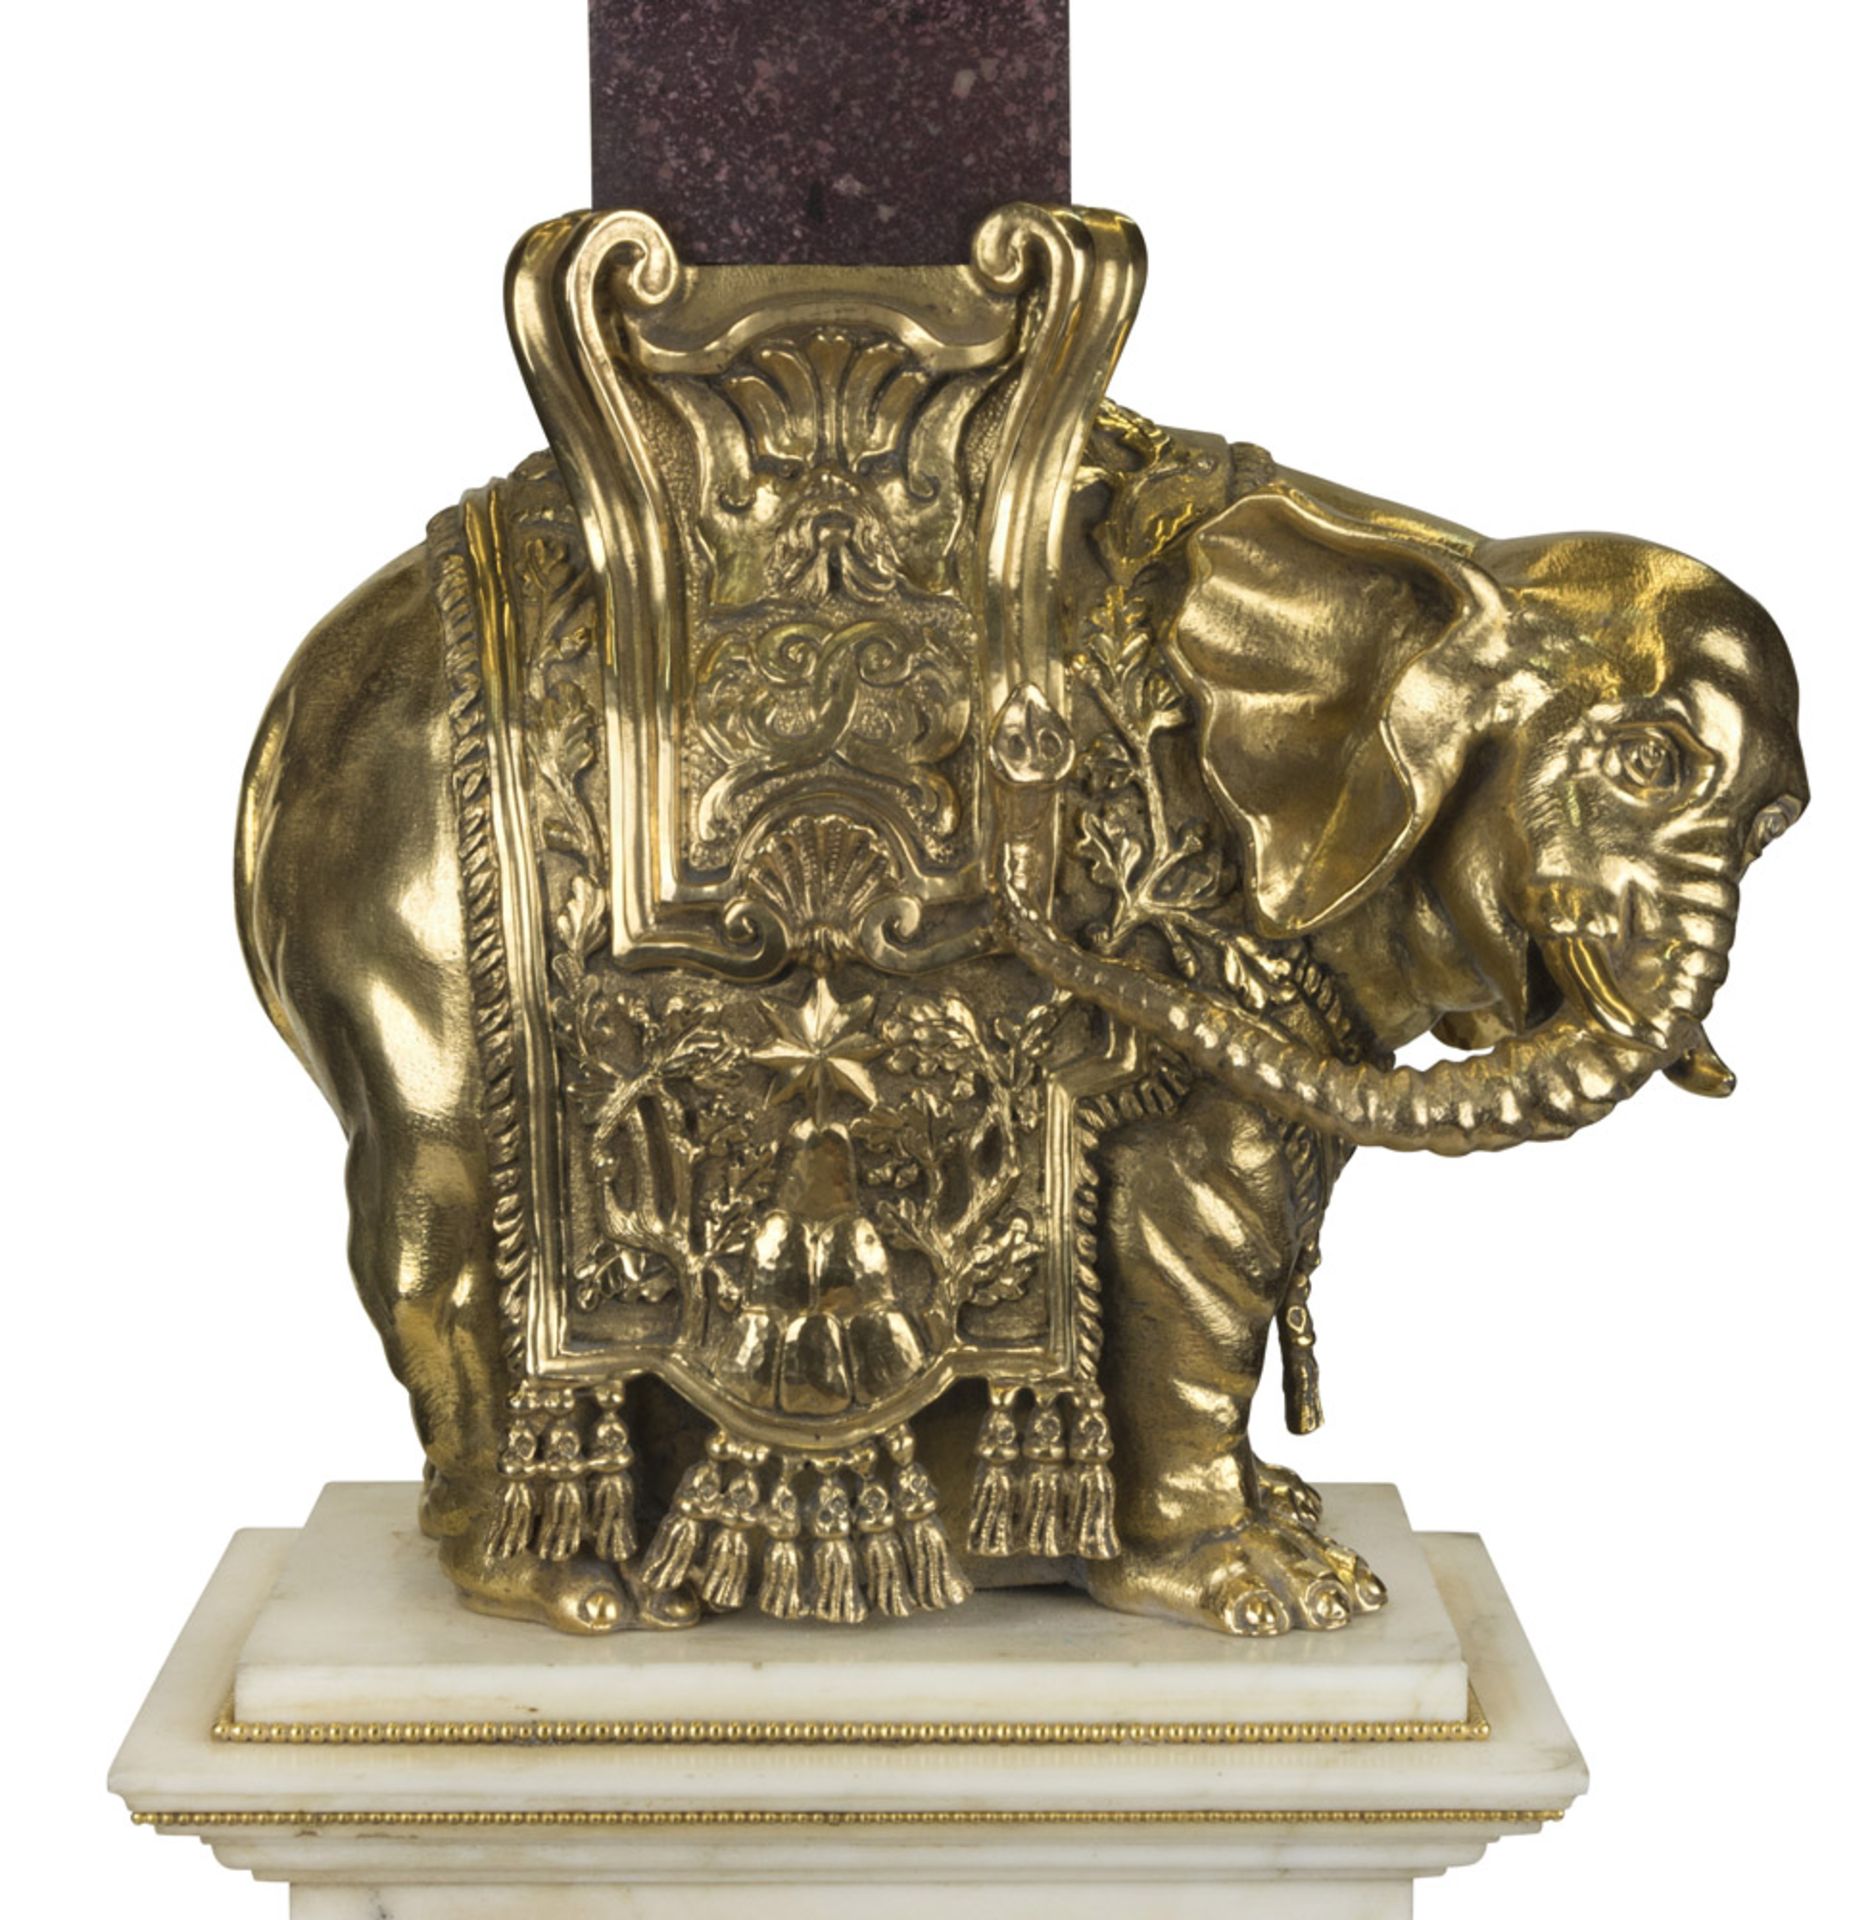 SPLENDID OBELISK MODEL IN MARBLE AND BRONZE, LATE 18TH, EARLY 19TH CENTURY body as elephant in - Image 3 of 3